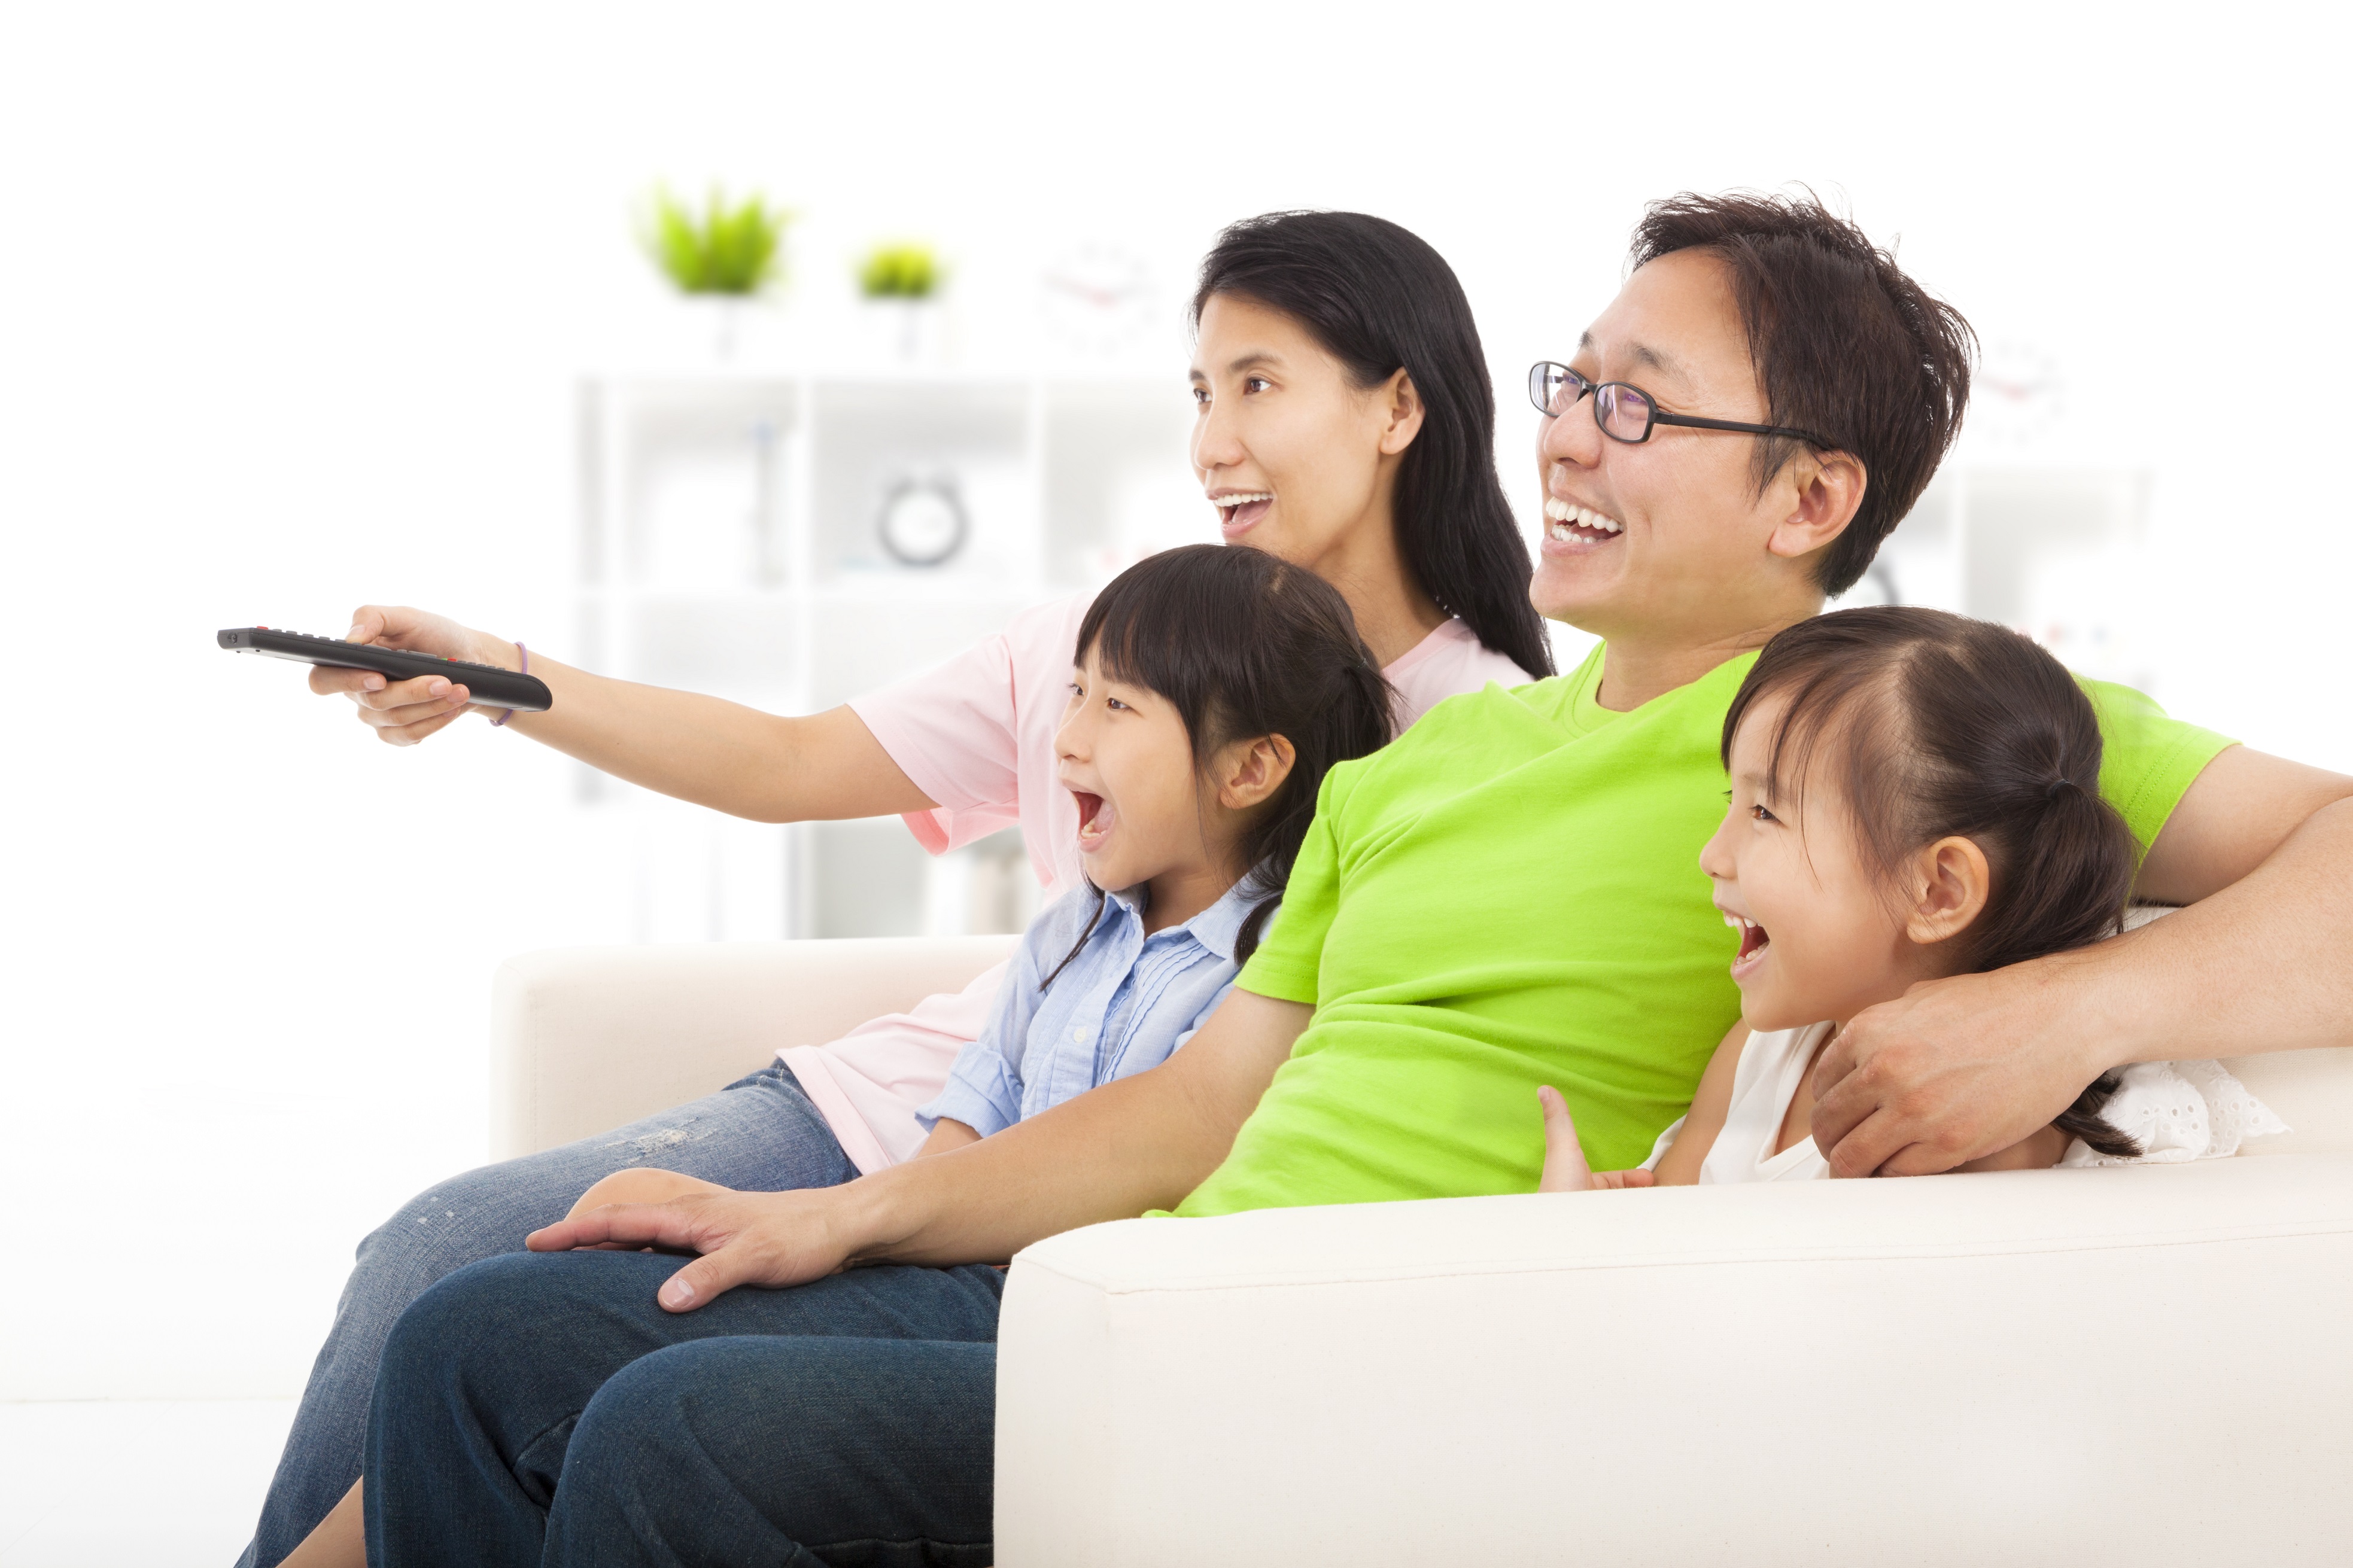 Screen-time Without the Guilt – Edutainment for the Whole Family